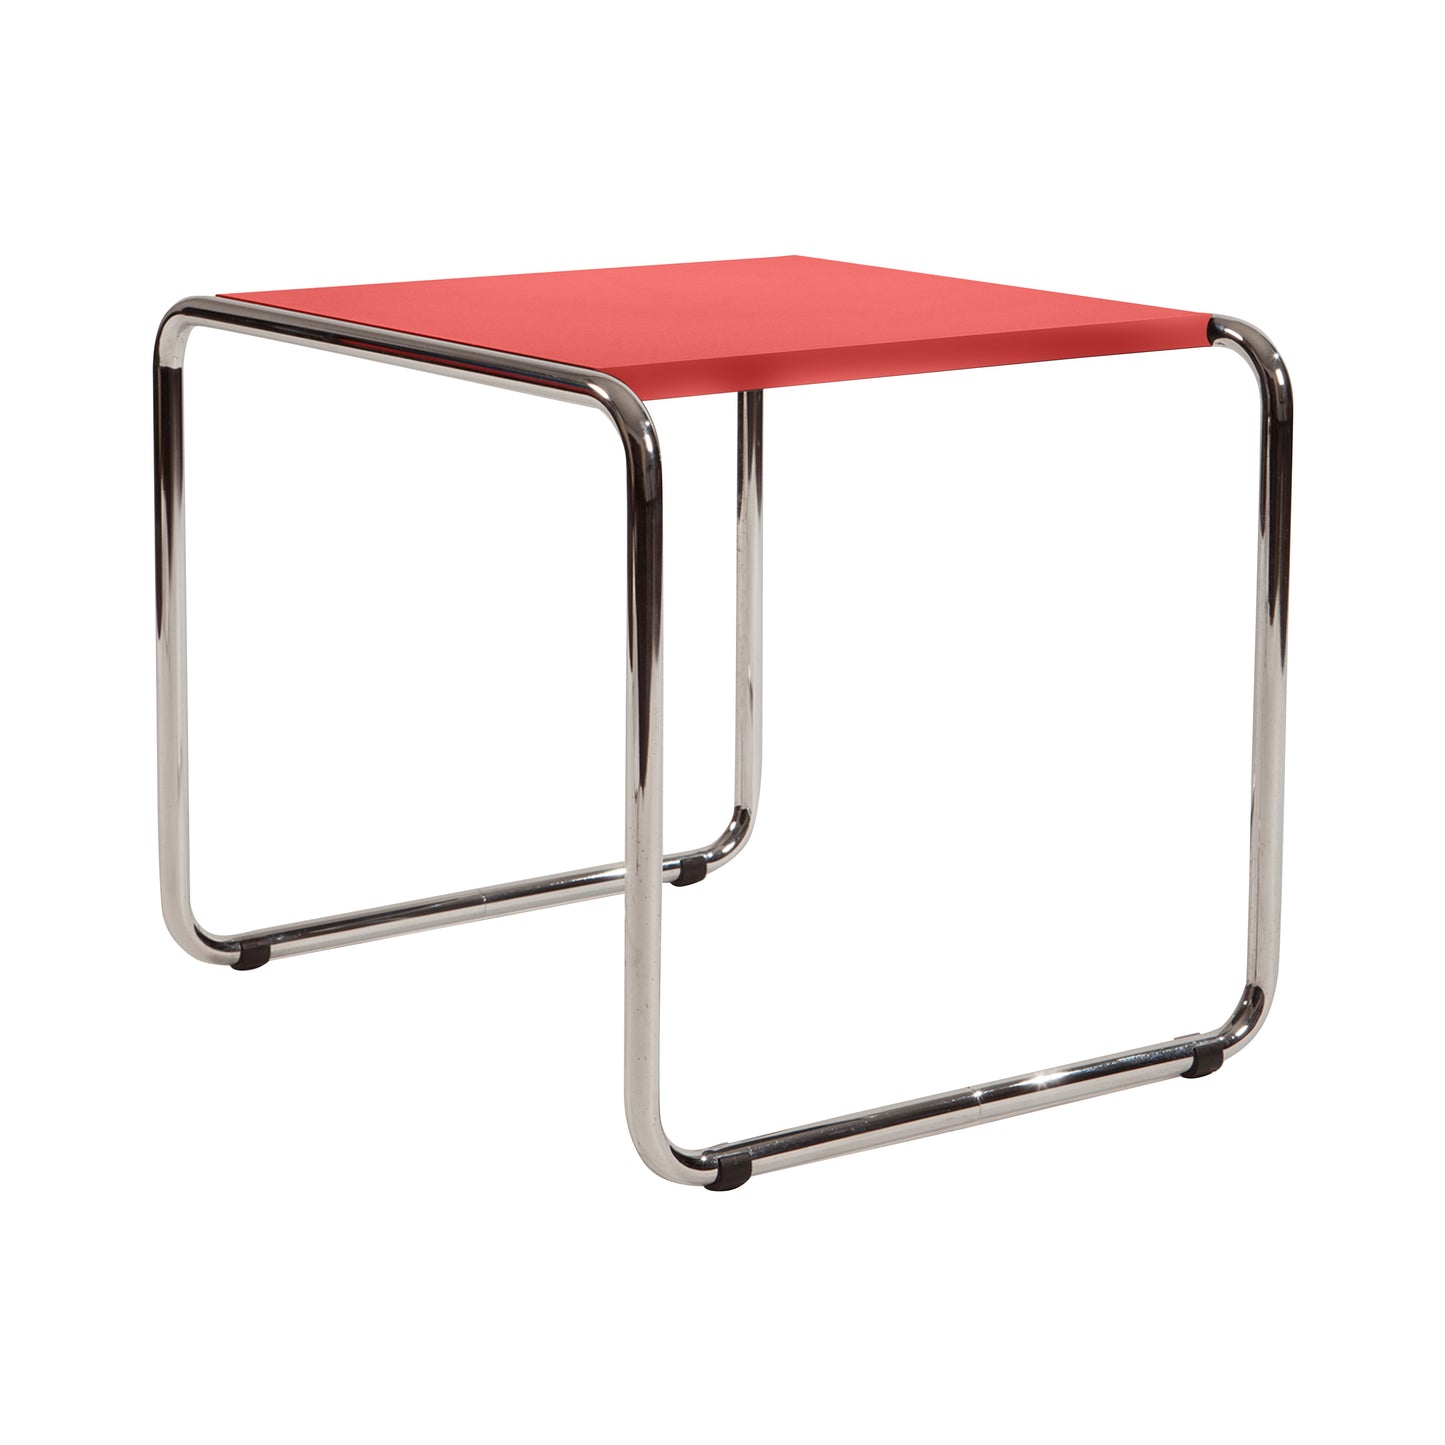 Laccio table style | Red | Side